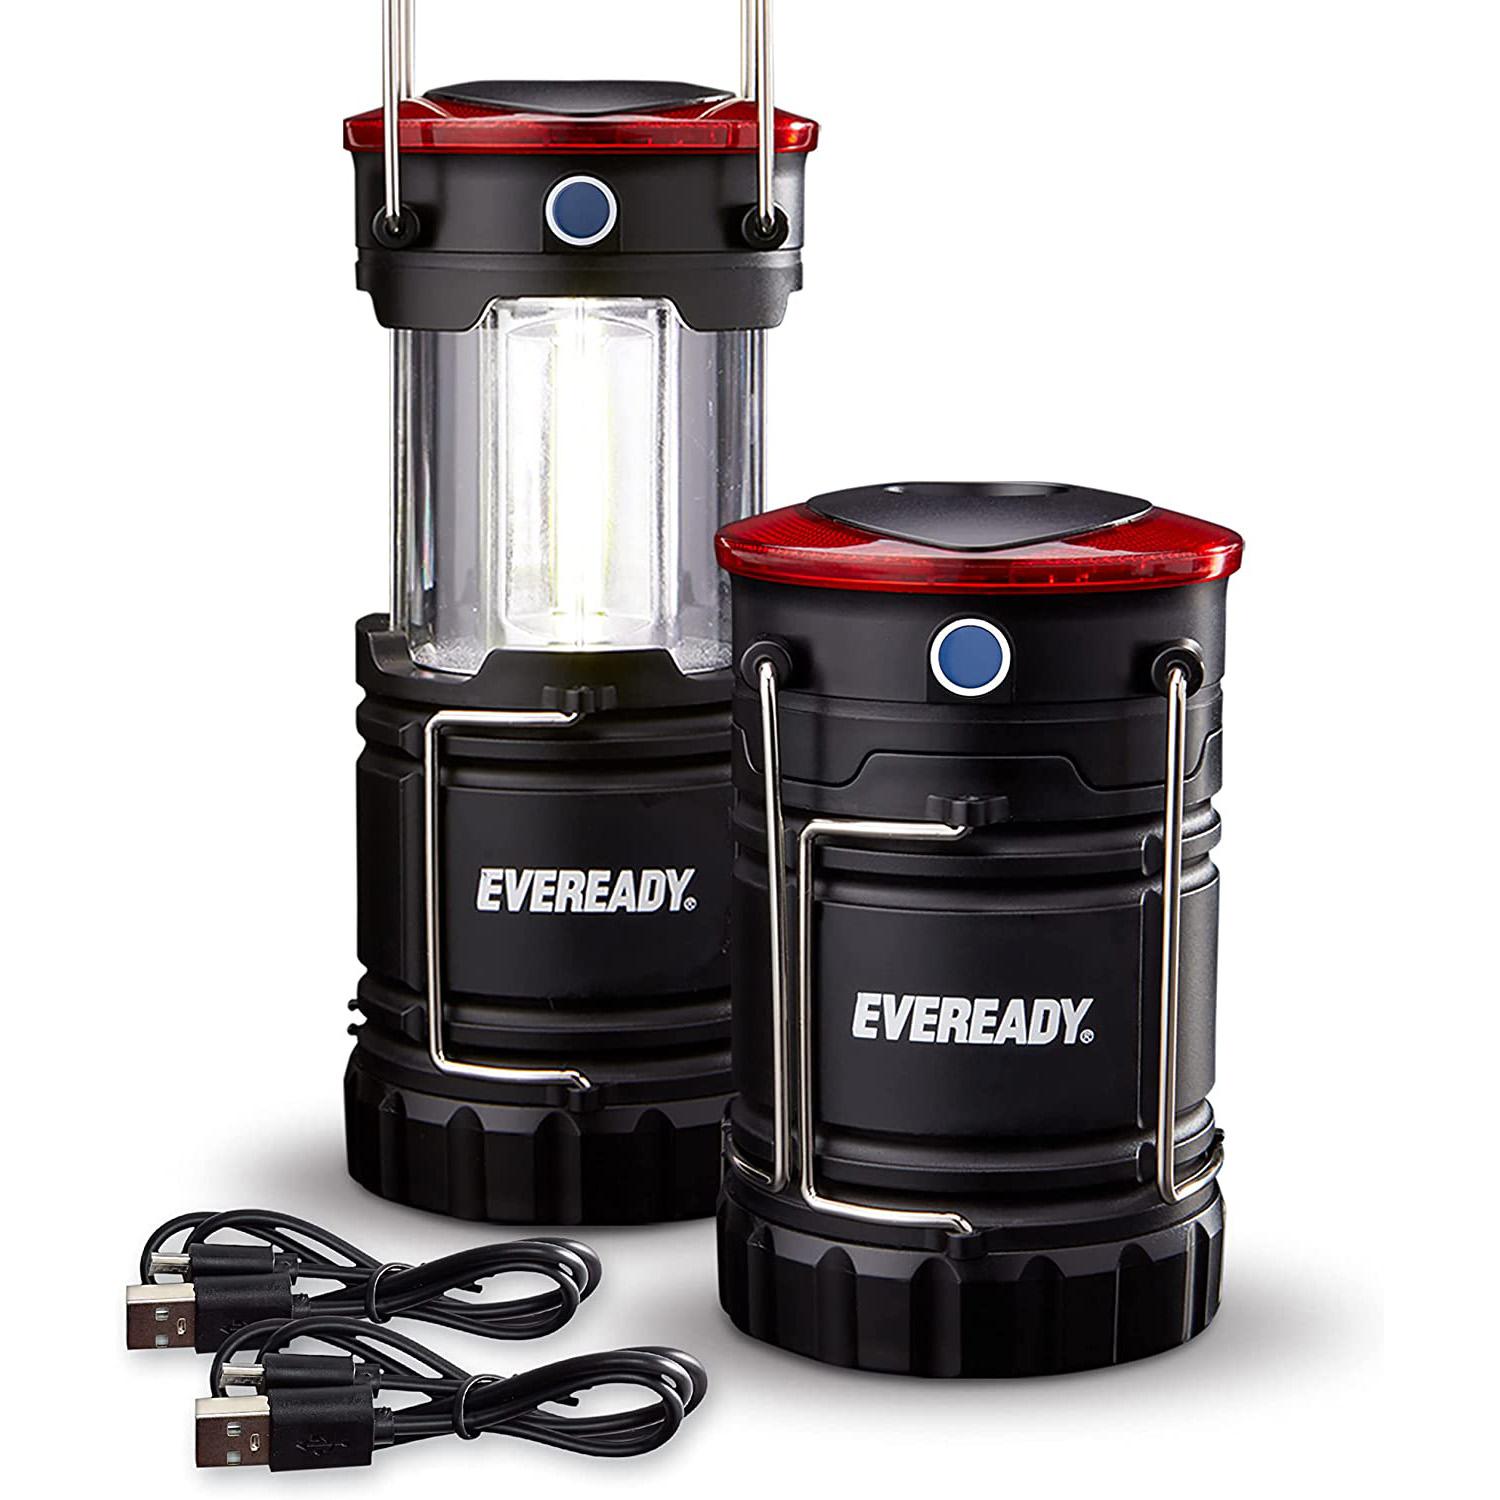 Eveready Rechargeable 360 Collapsible LED Camping Lantern 2 Pack for $11.23